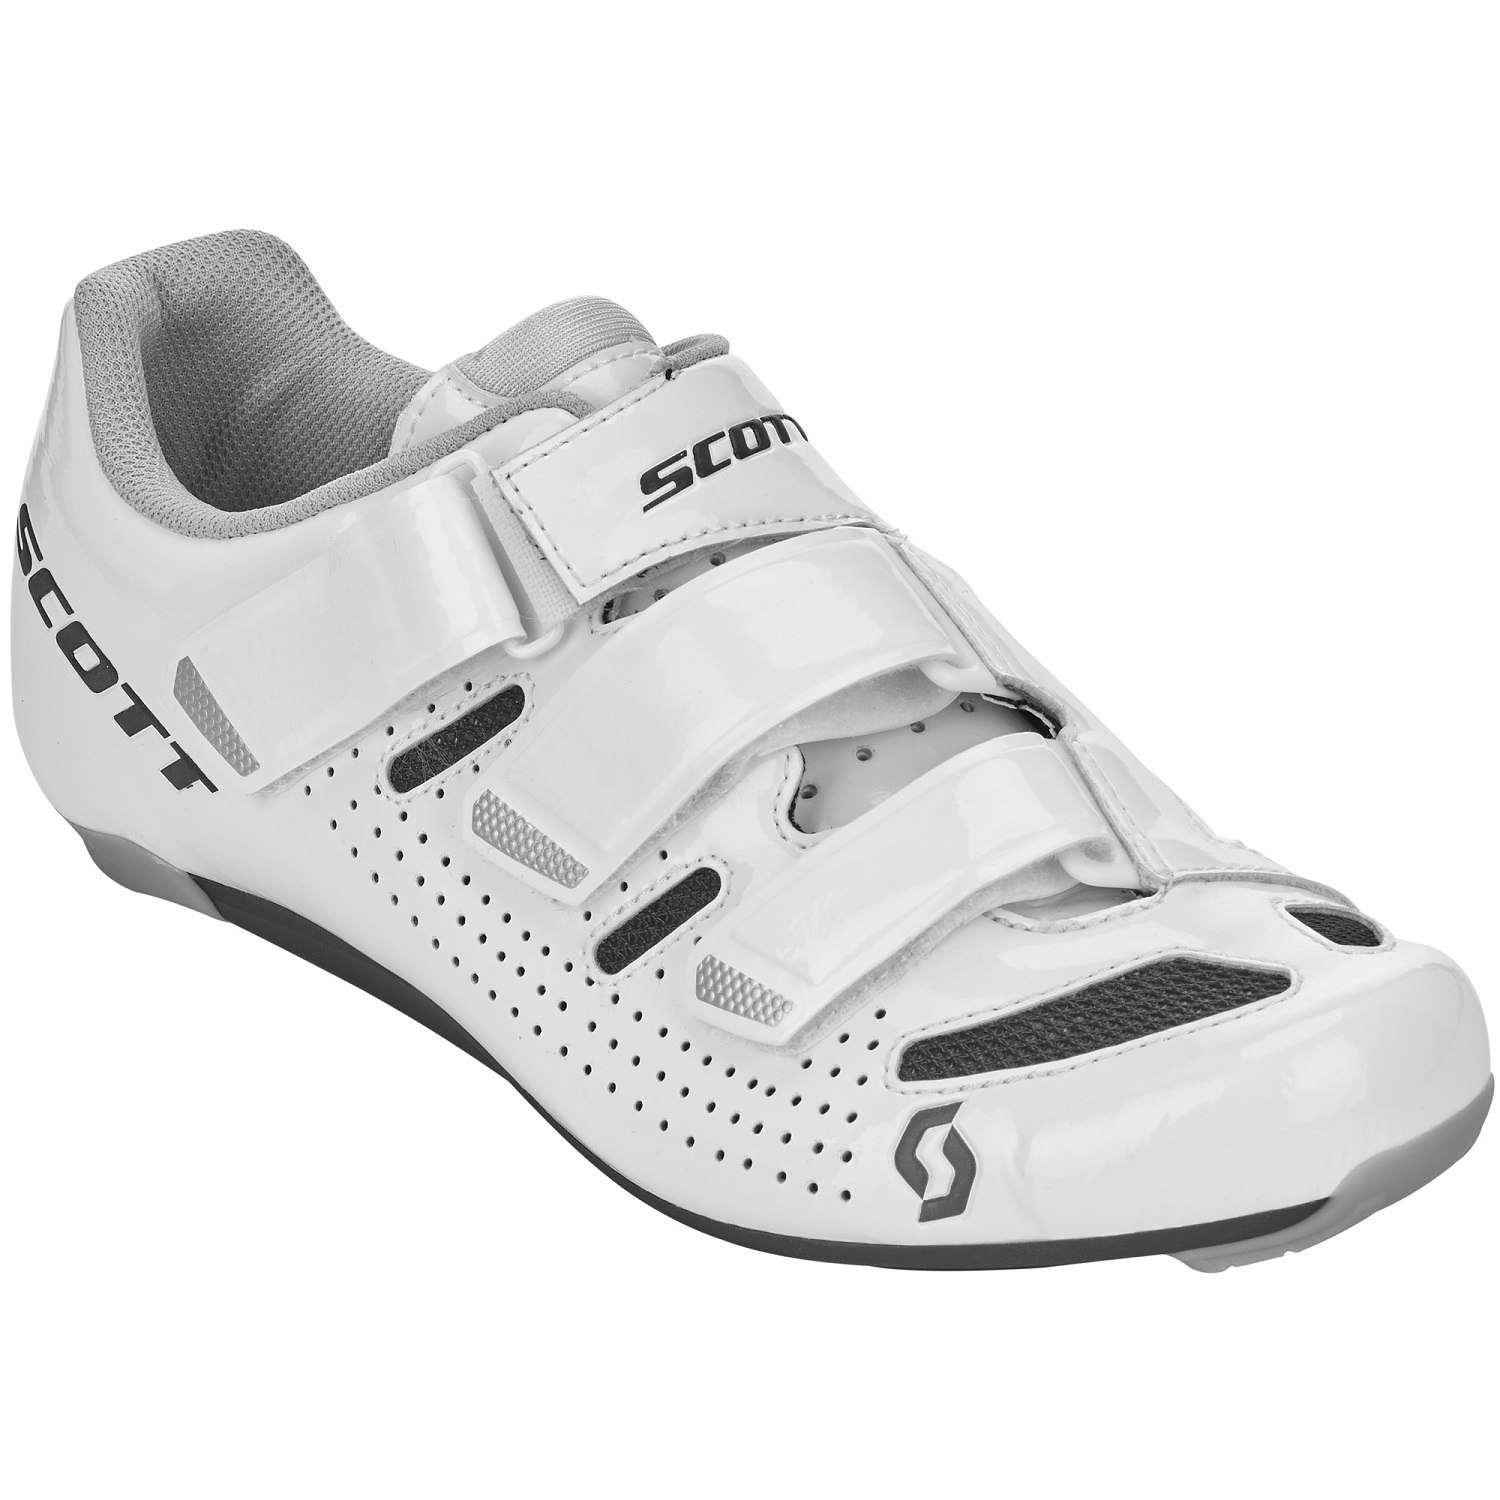 Picture of SCOTT Road Comp Shoes Women - gloss white/gloss black